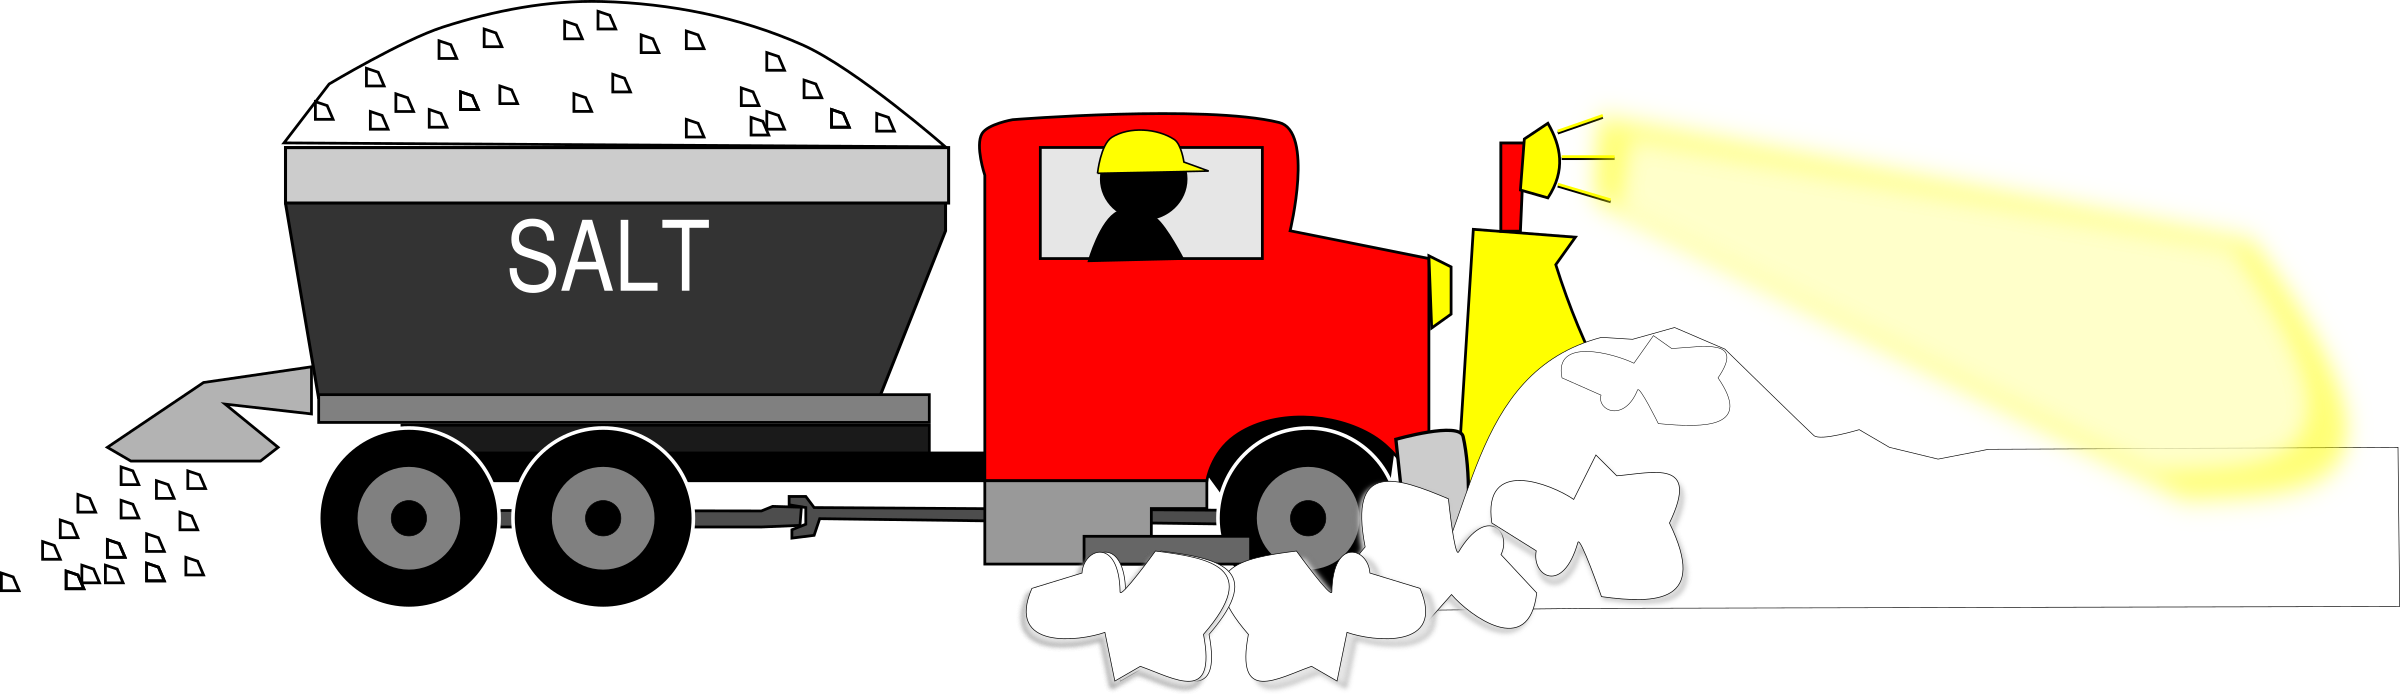 snow removal clipart free - photo #30